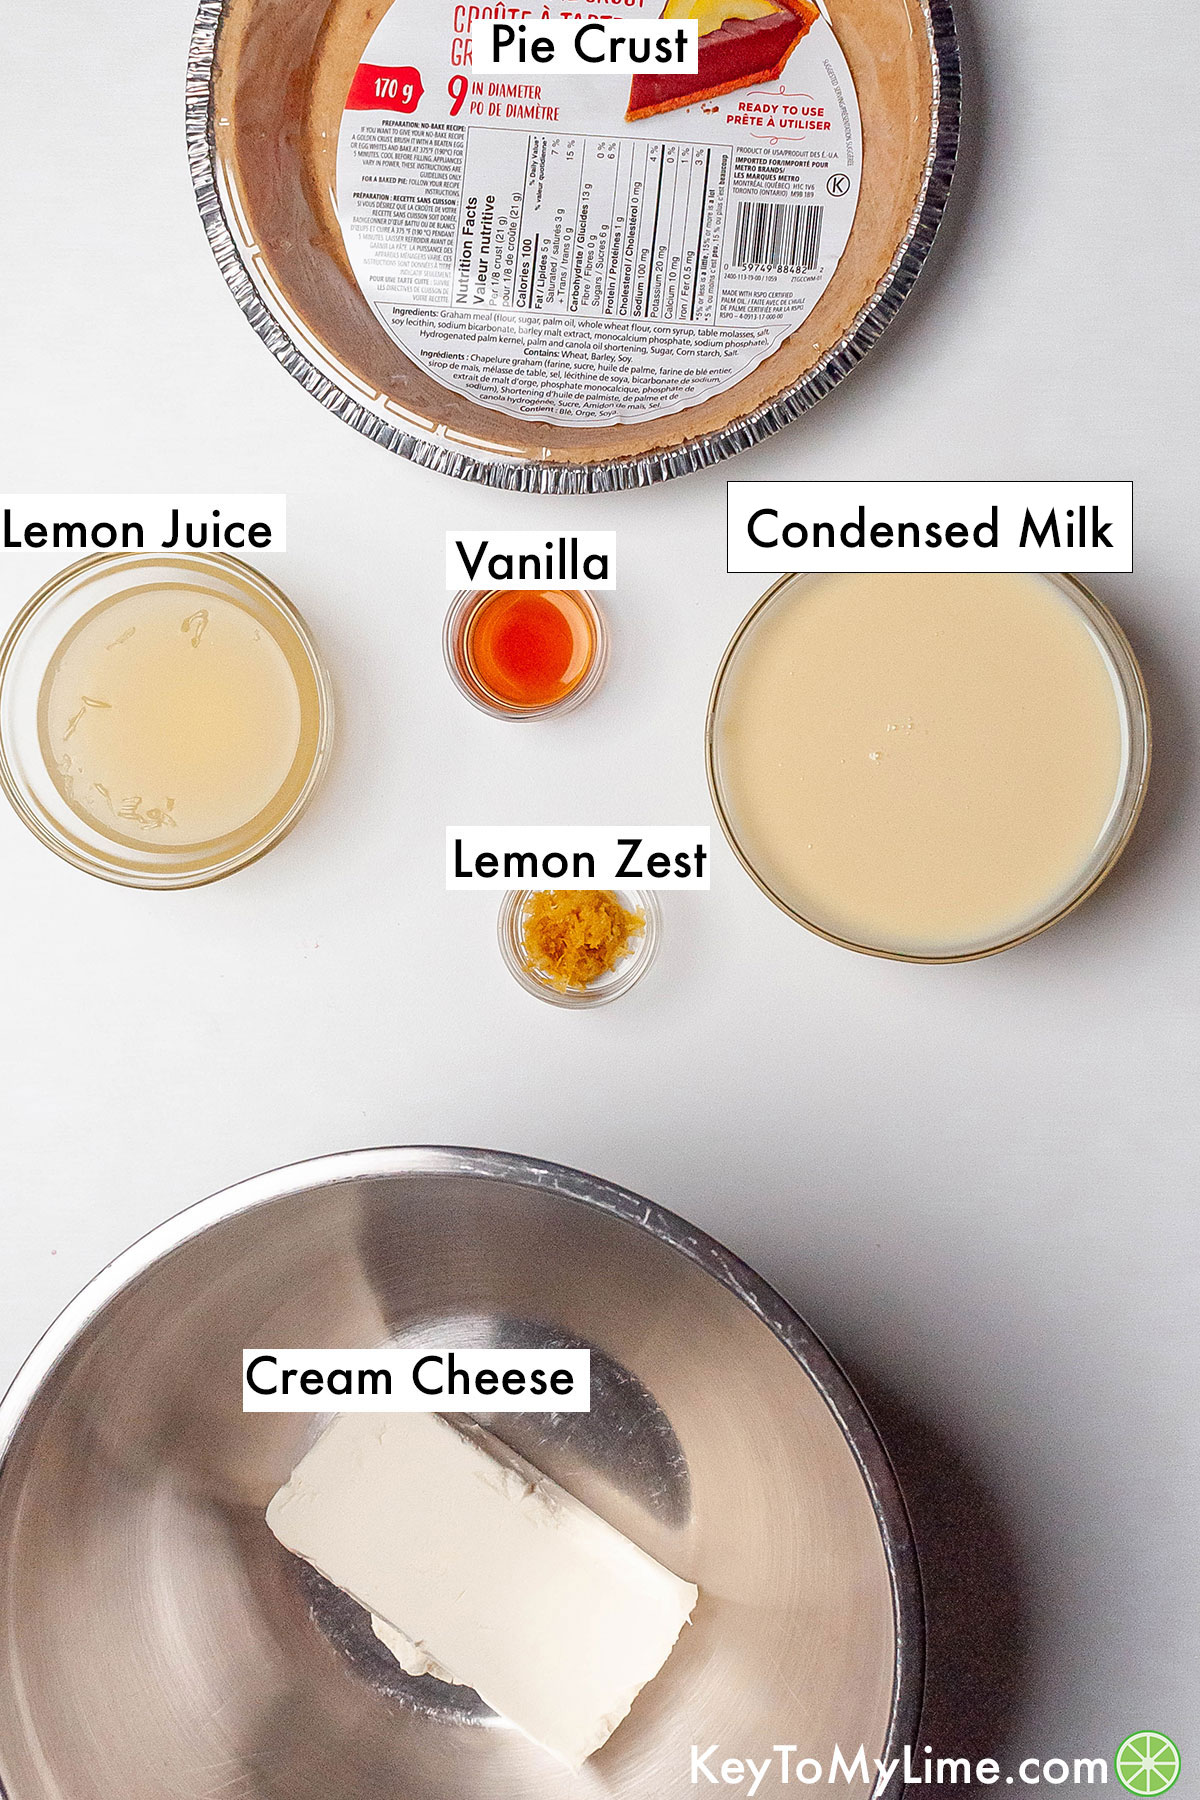 The labeled ingredients for lemon icebox pie.